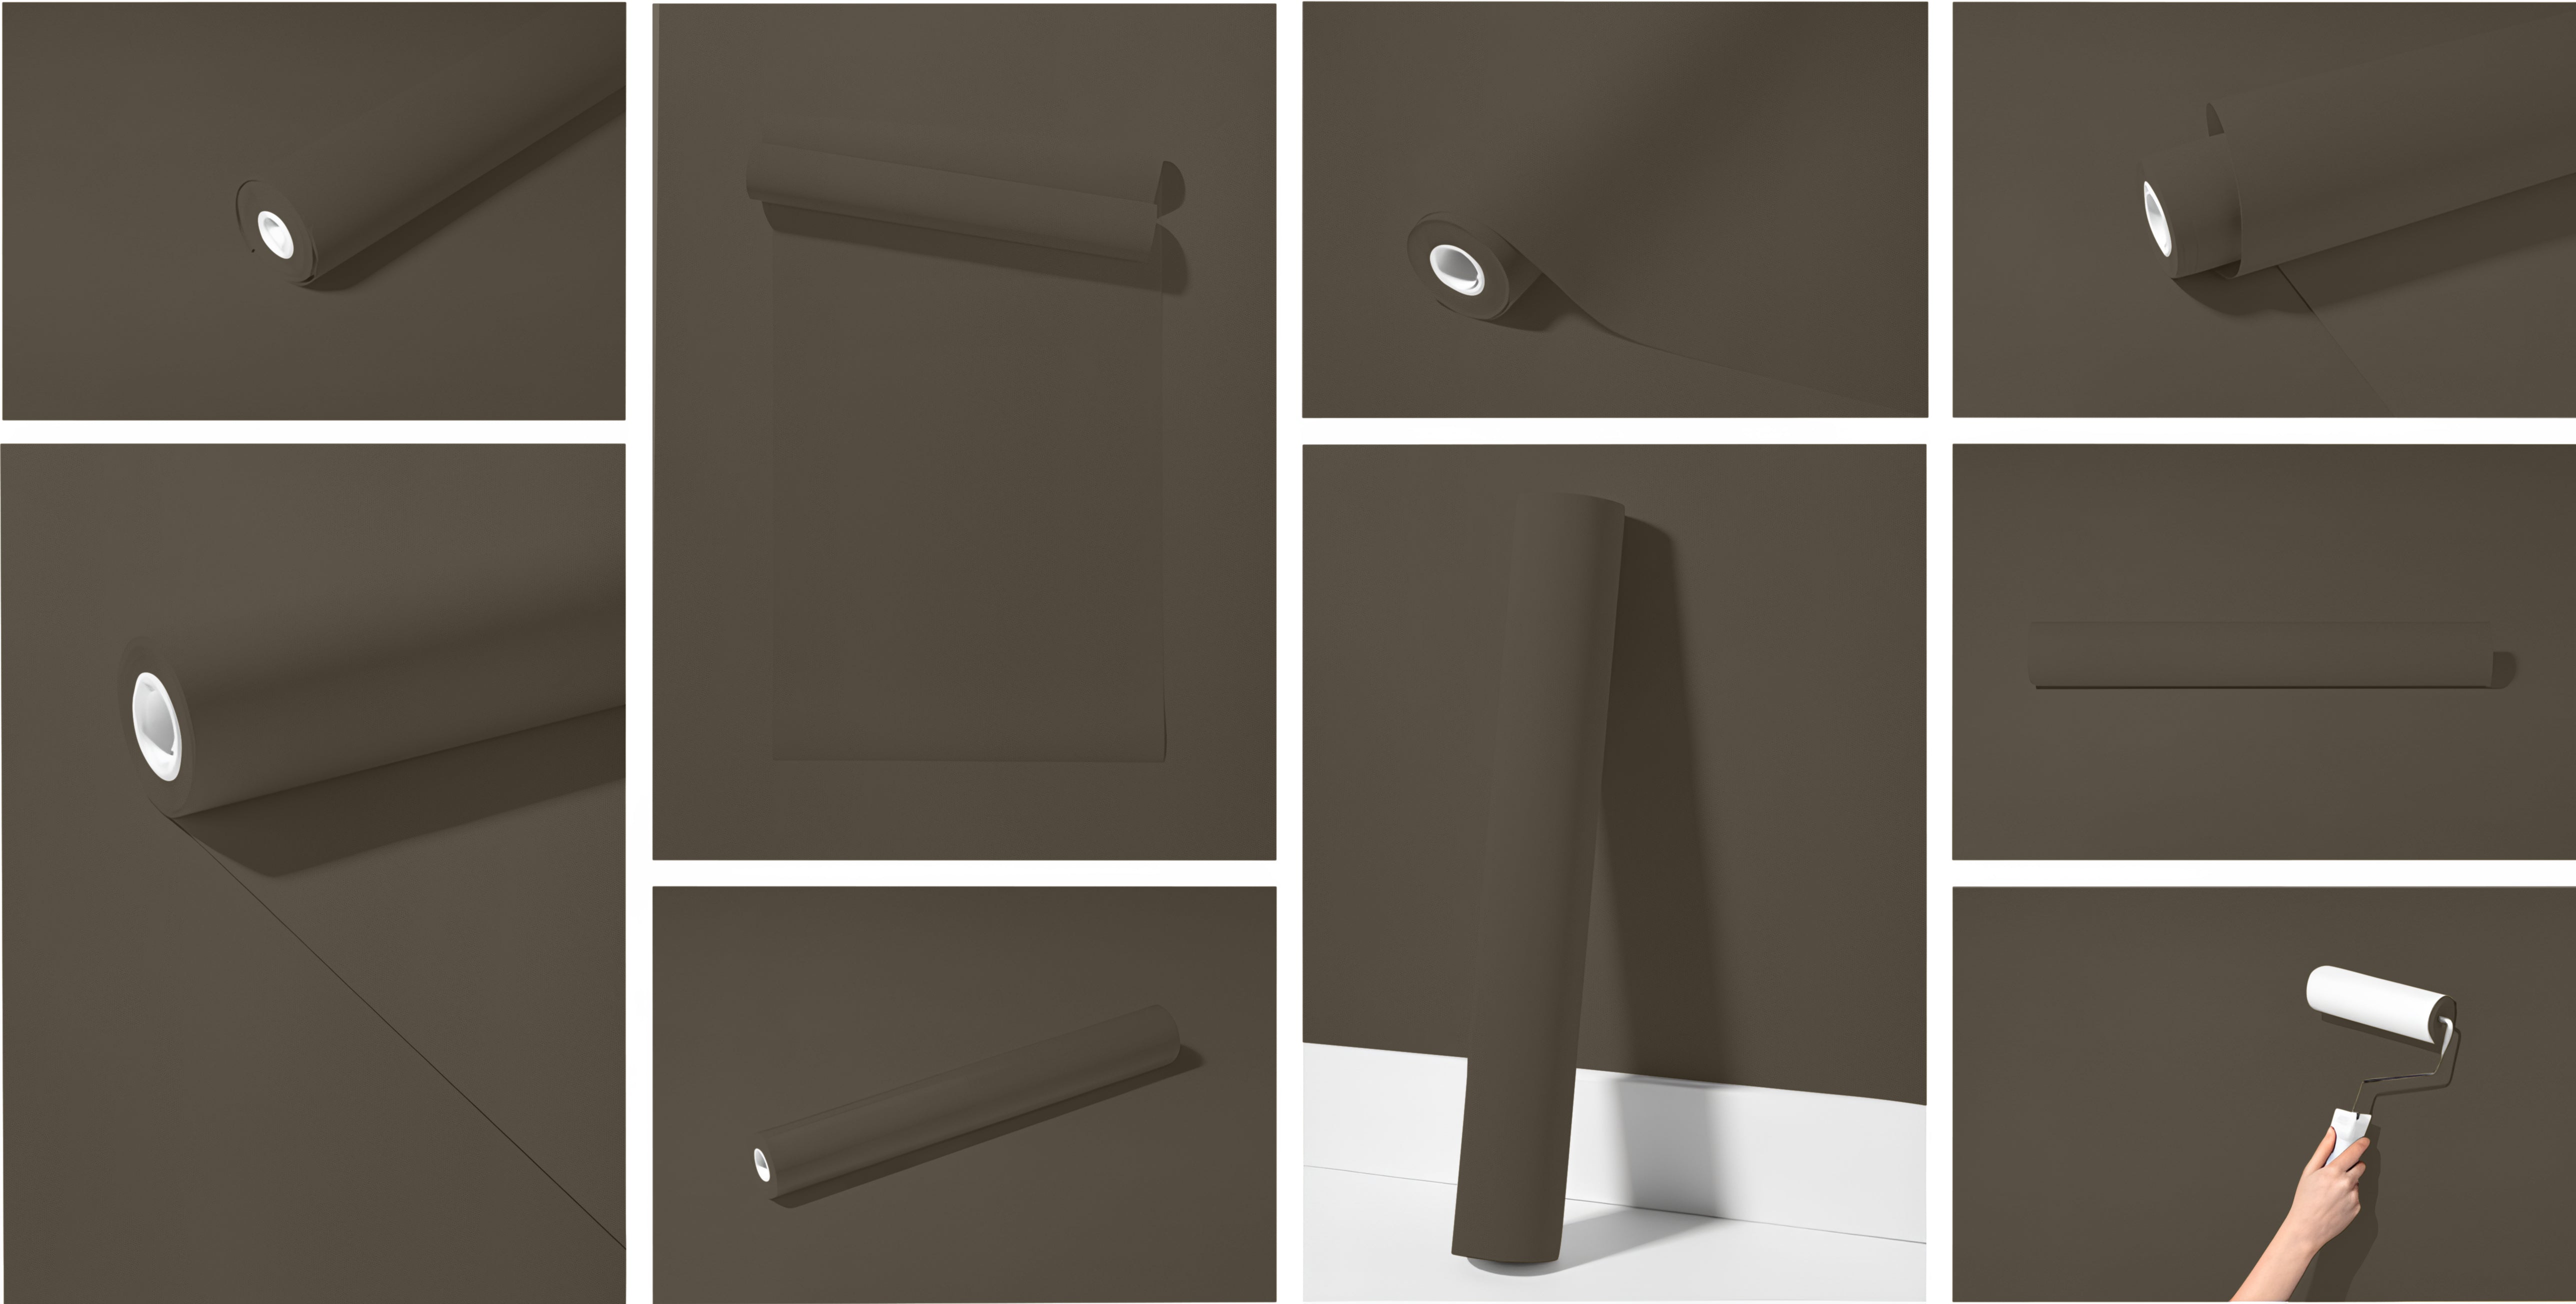 Peel & Stick Removable Re-usable Paint - Color RAL 7013 Brown Grey - offRAL™ - RALRAW LLC, USA